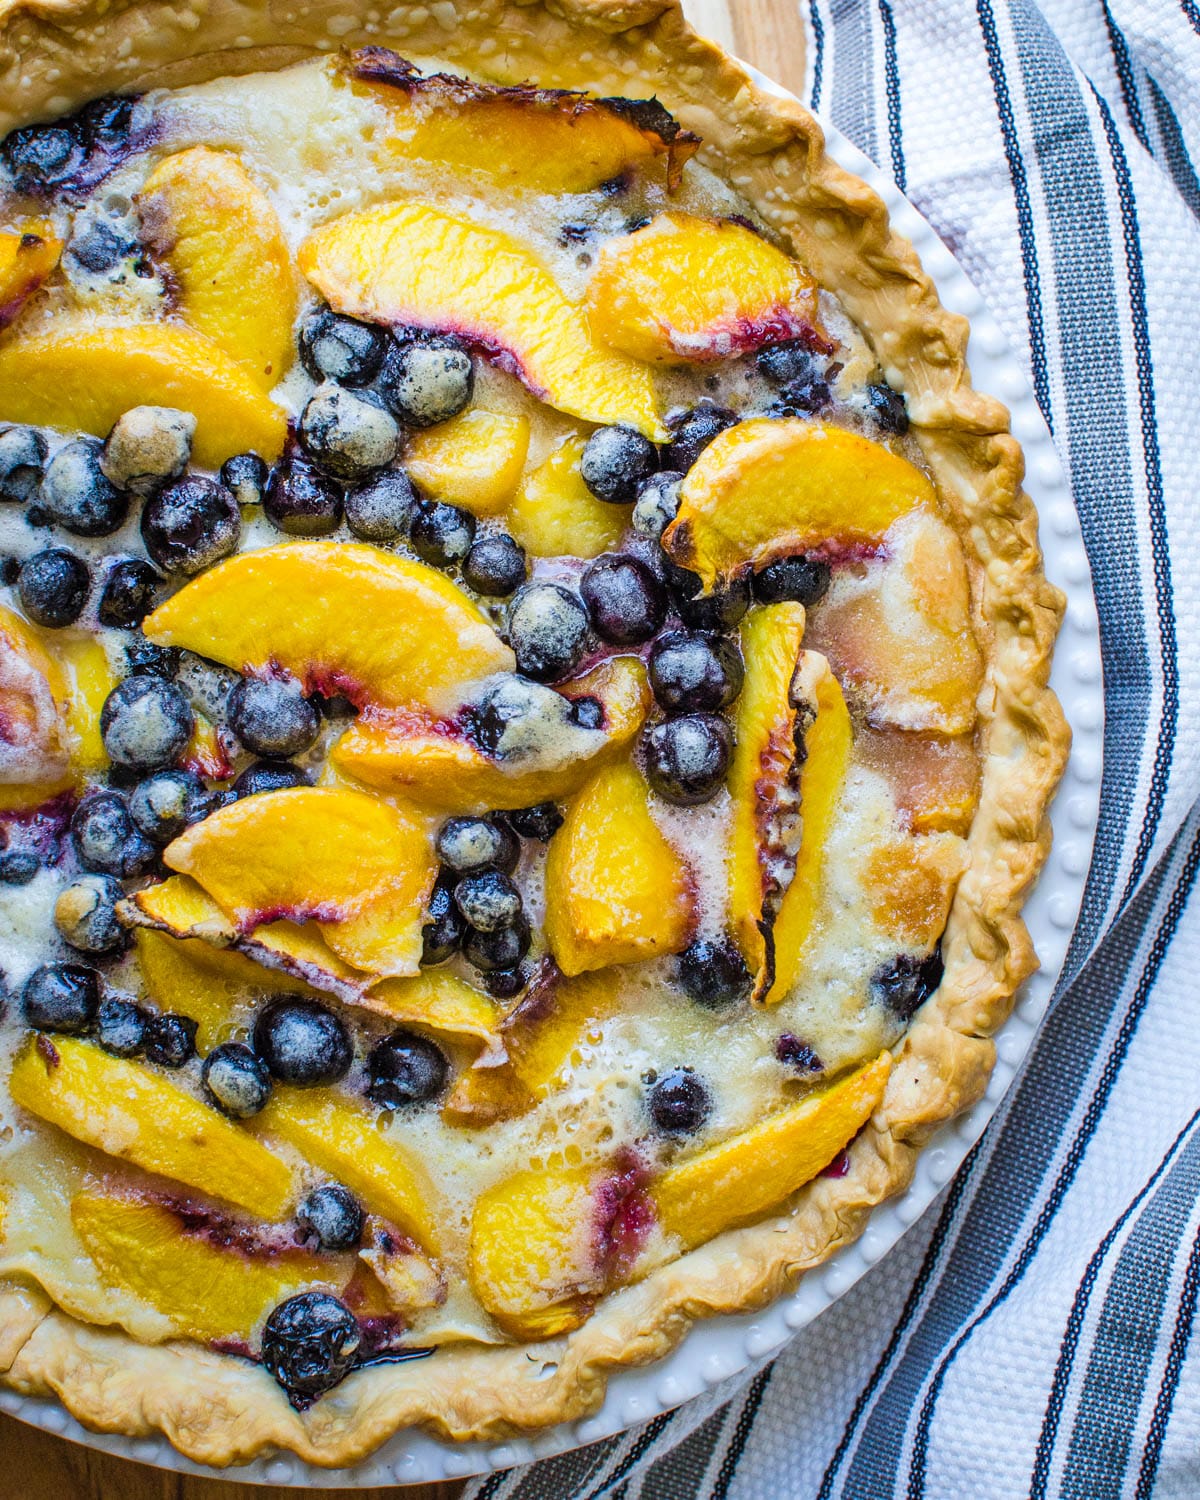 A peach and blueberry pie.